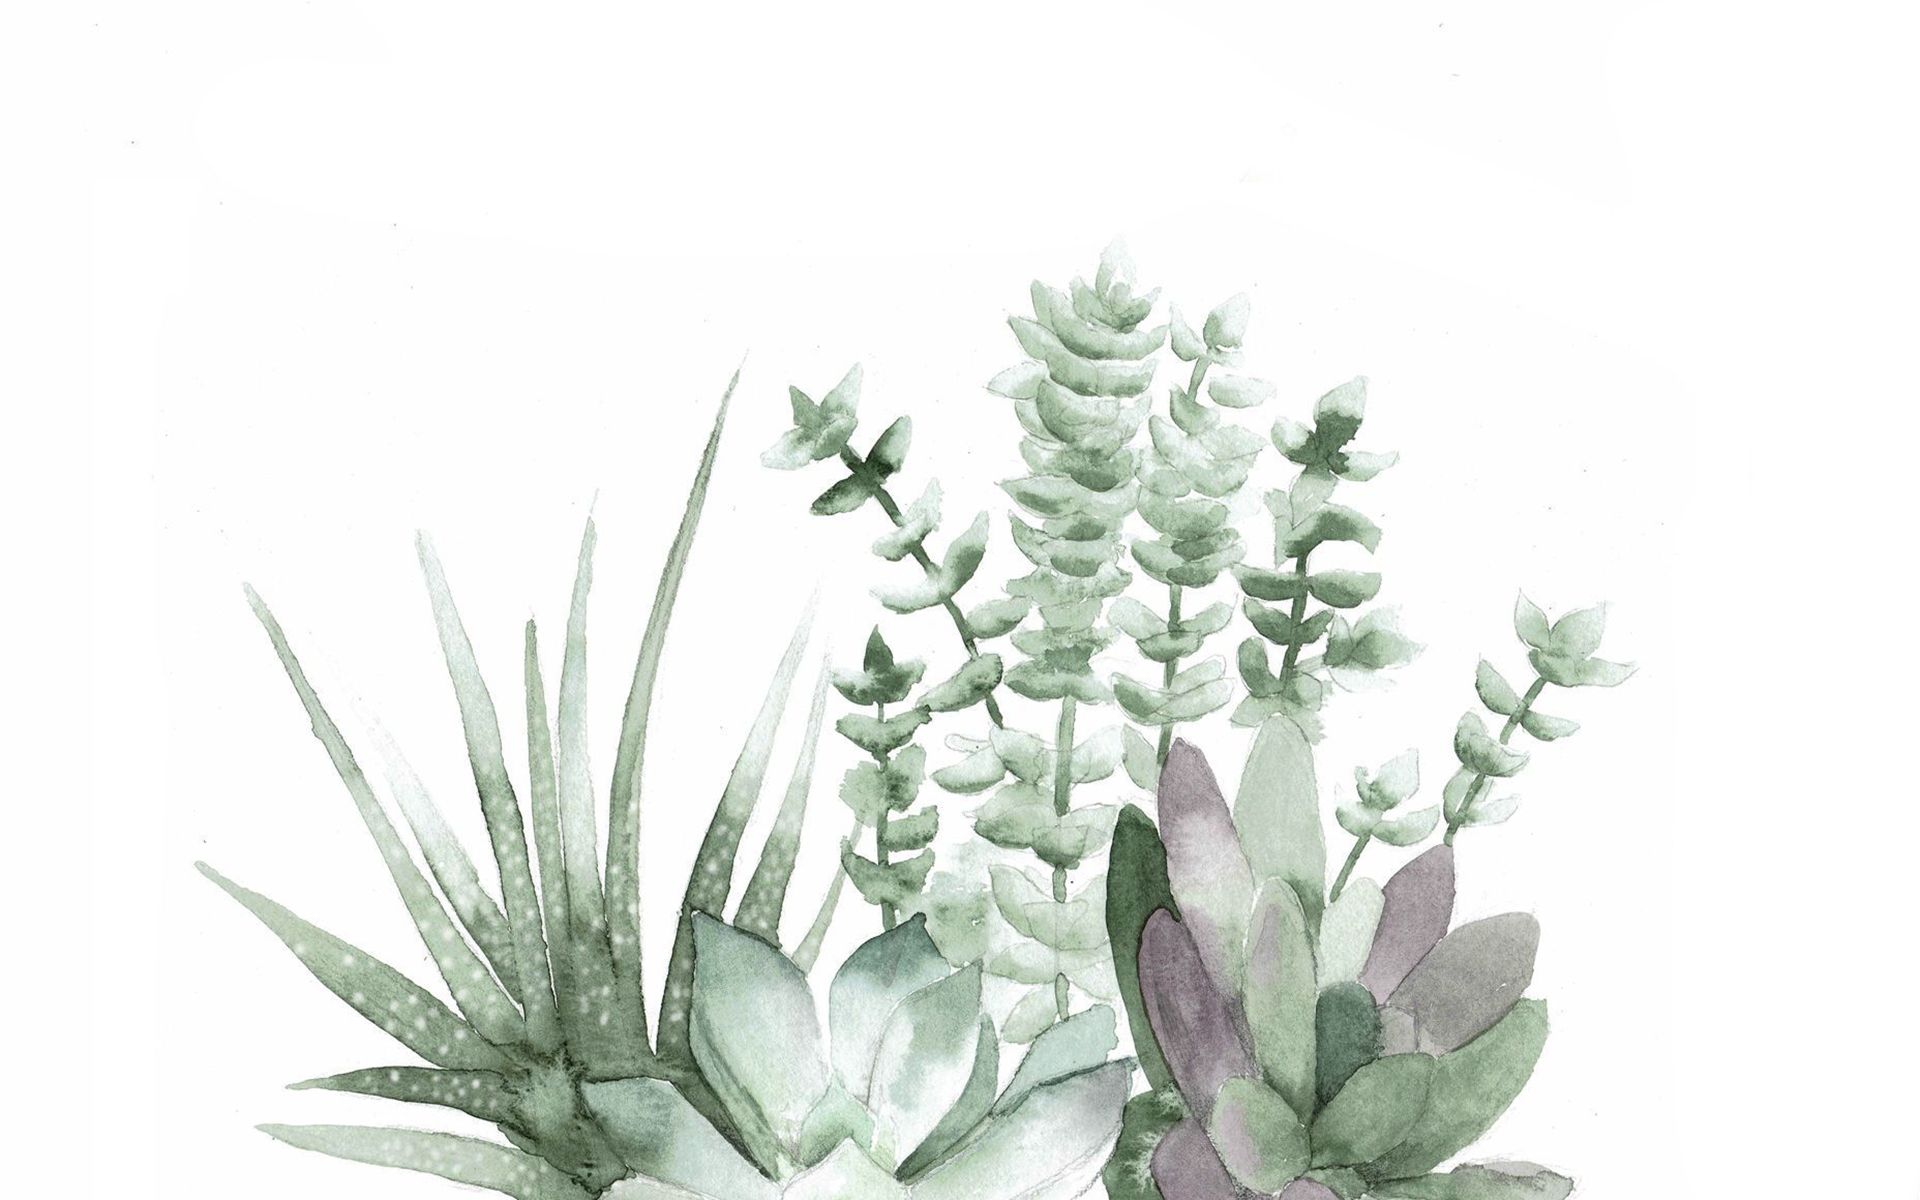 A watercolor painting of some plants - Plants, succulent